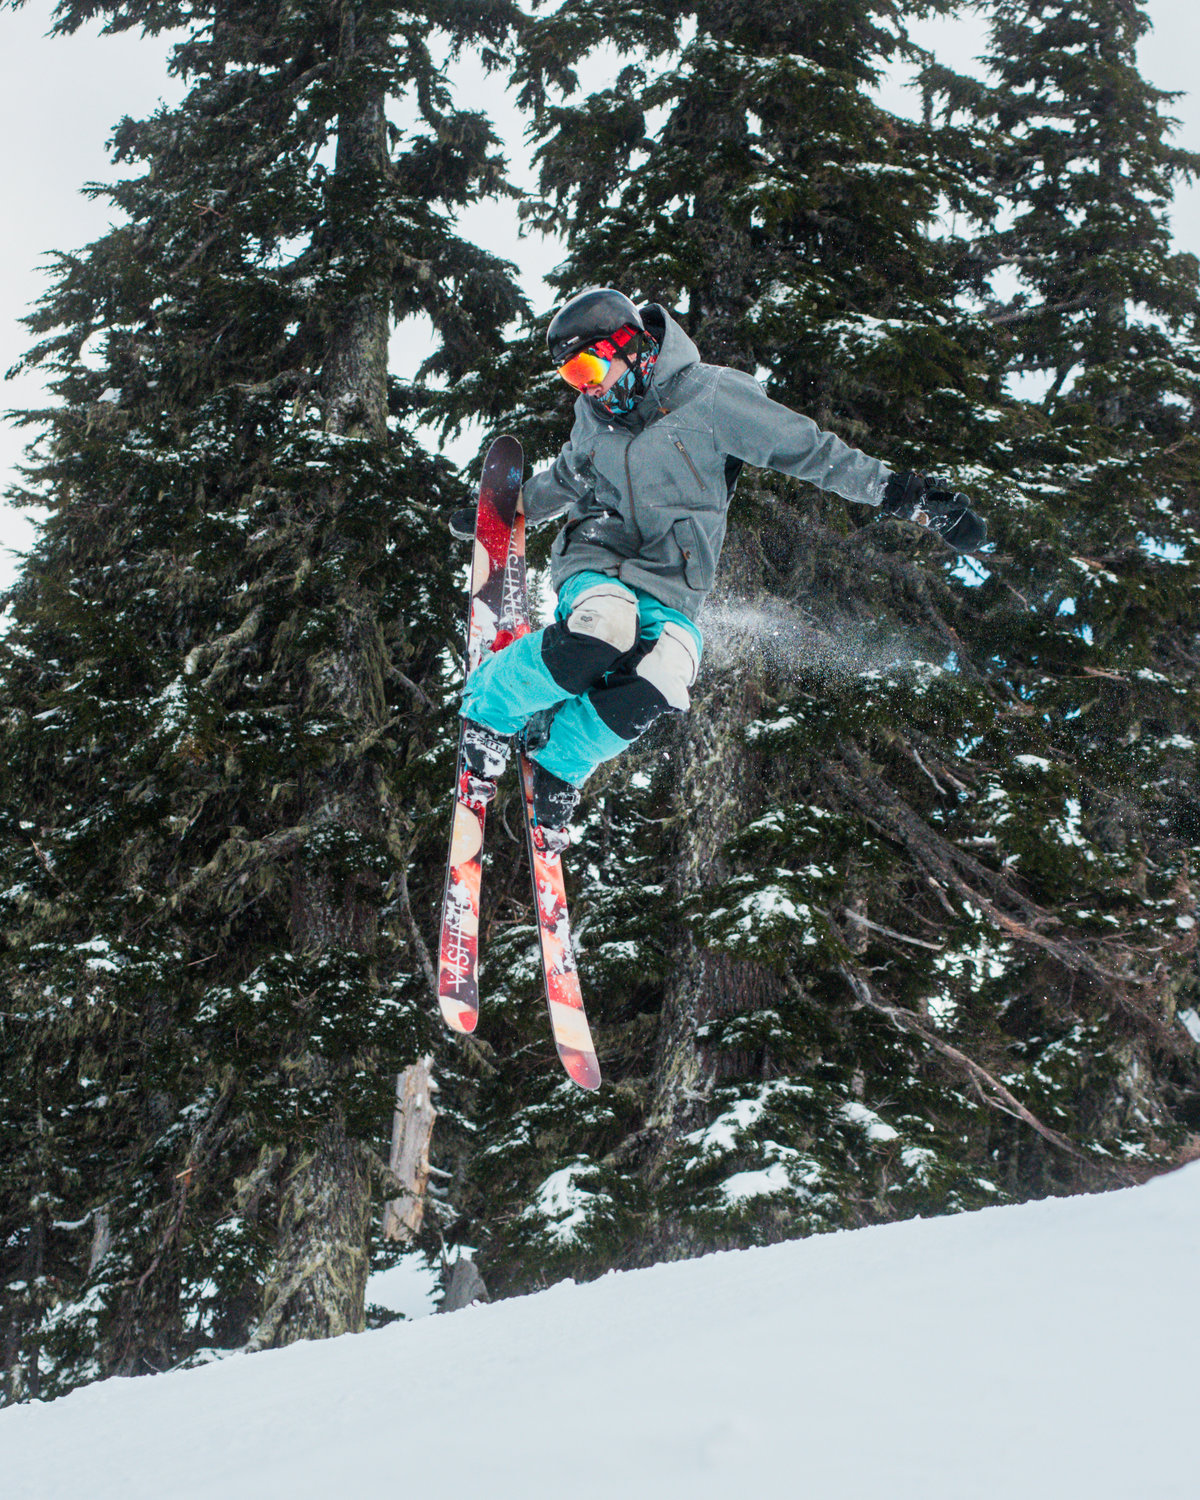 A skier makes a grab as they take air at the Ribeye jump park inside the White Pass Ski Area on Sunday.